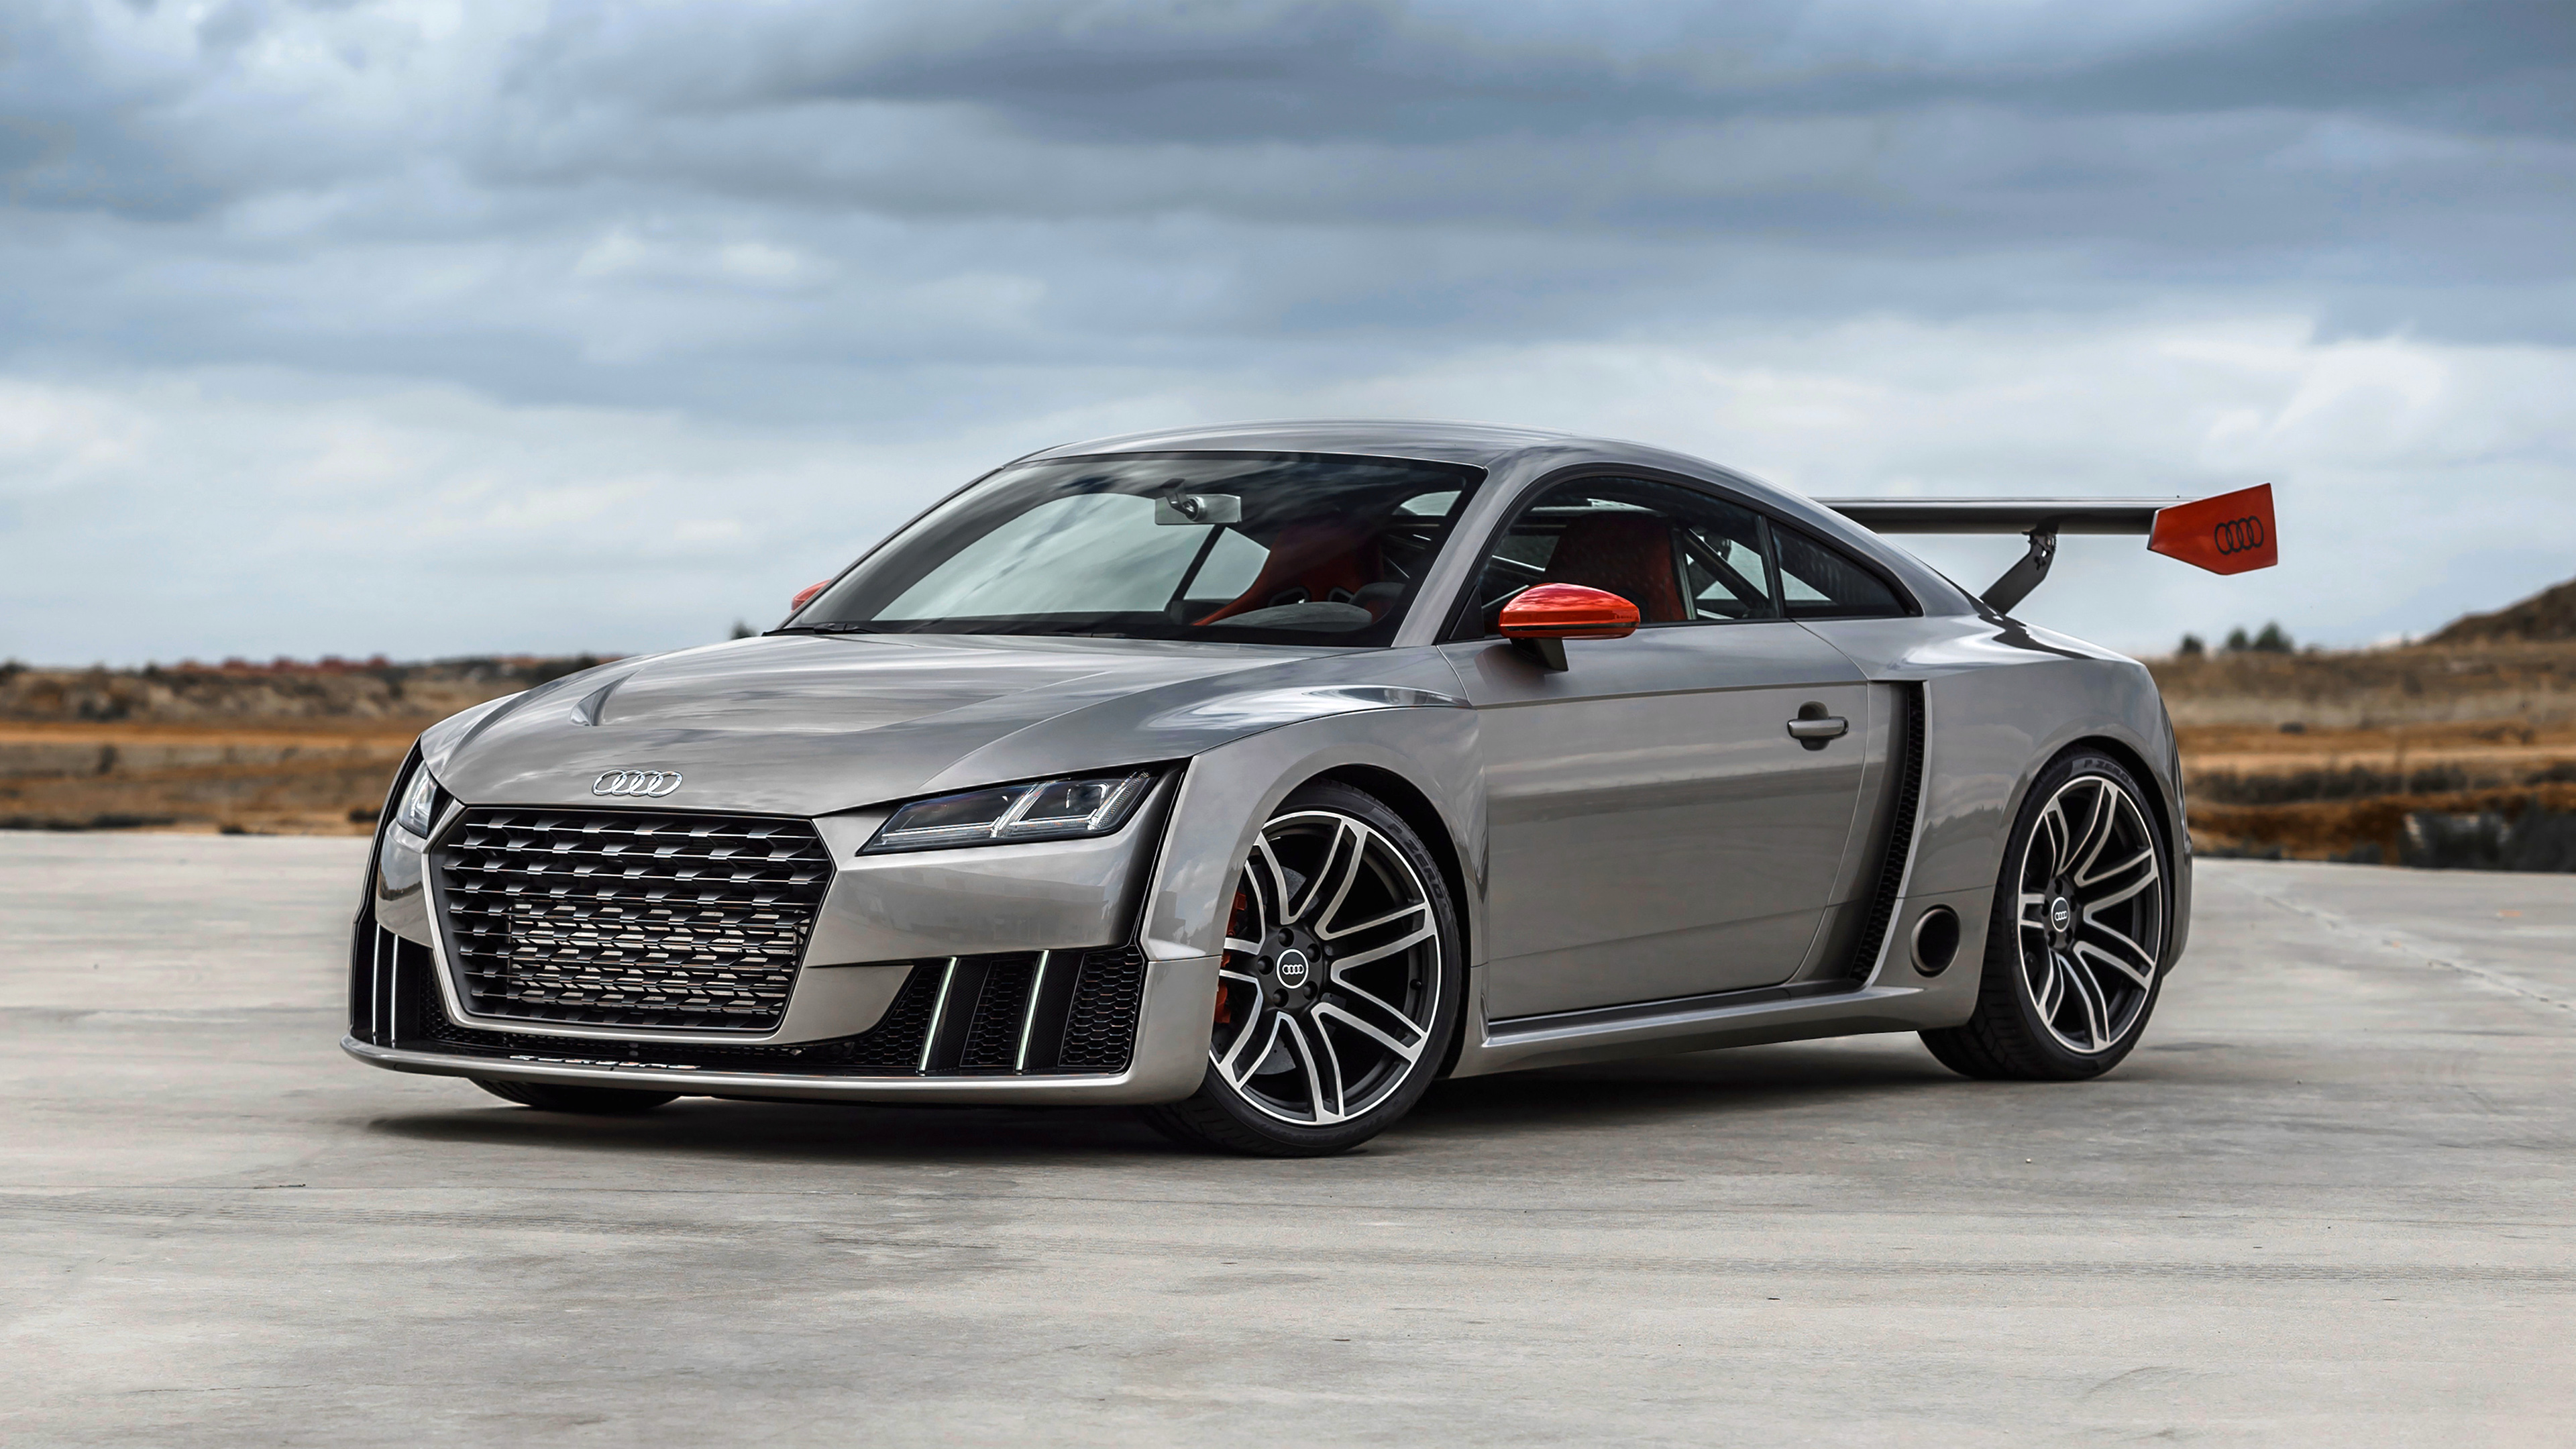 Audi TT Coupe Concept 2015 Wallpapers | HD Wallpapers